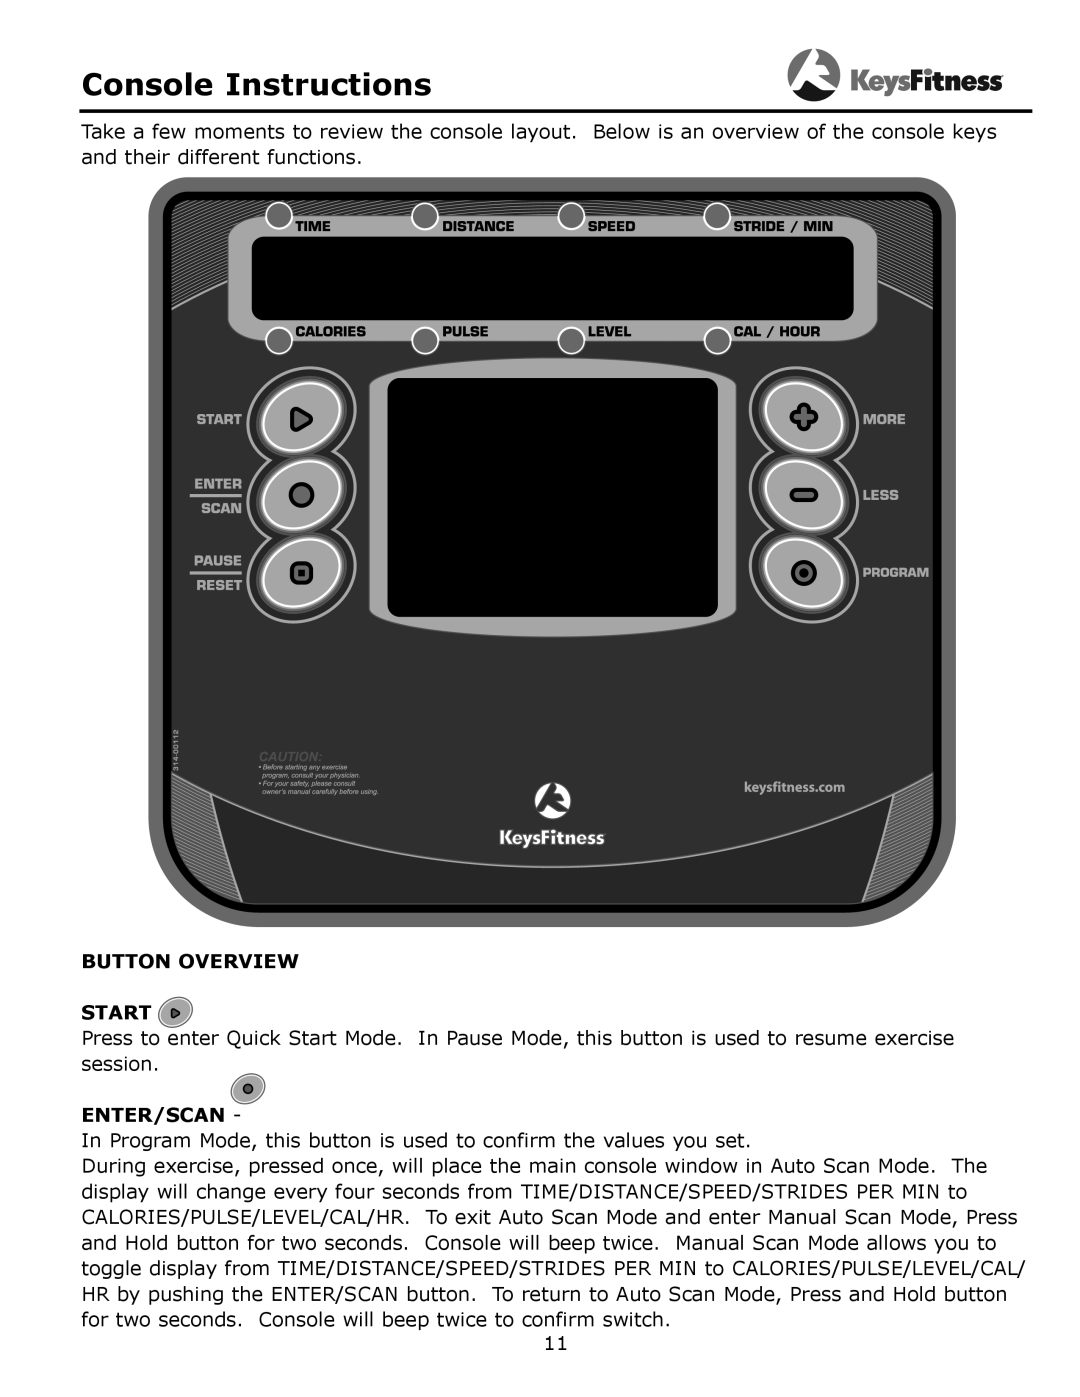 Keys Fitness 315-00106 owner manual Console Instructions, Button Overview Start, Enter/Scan 